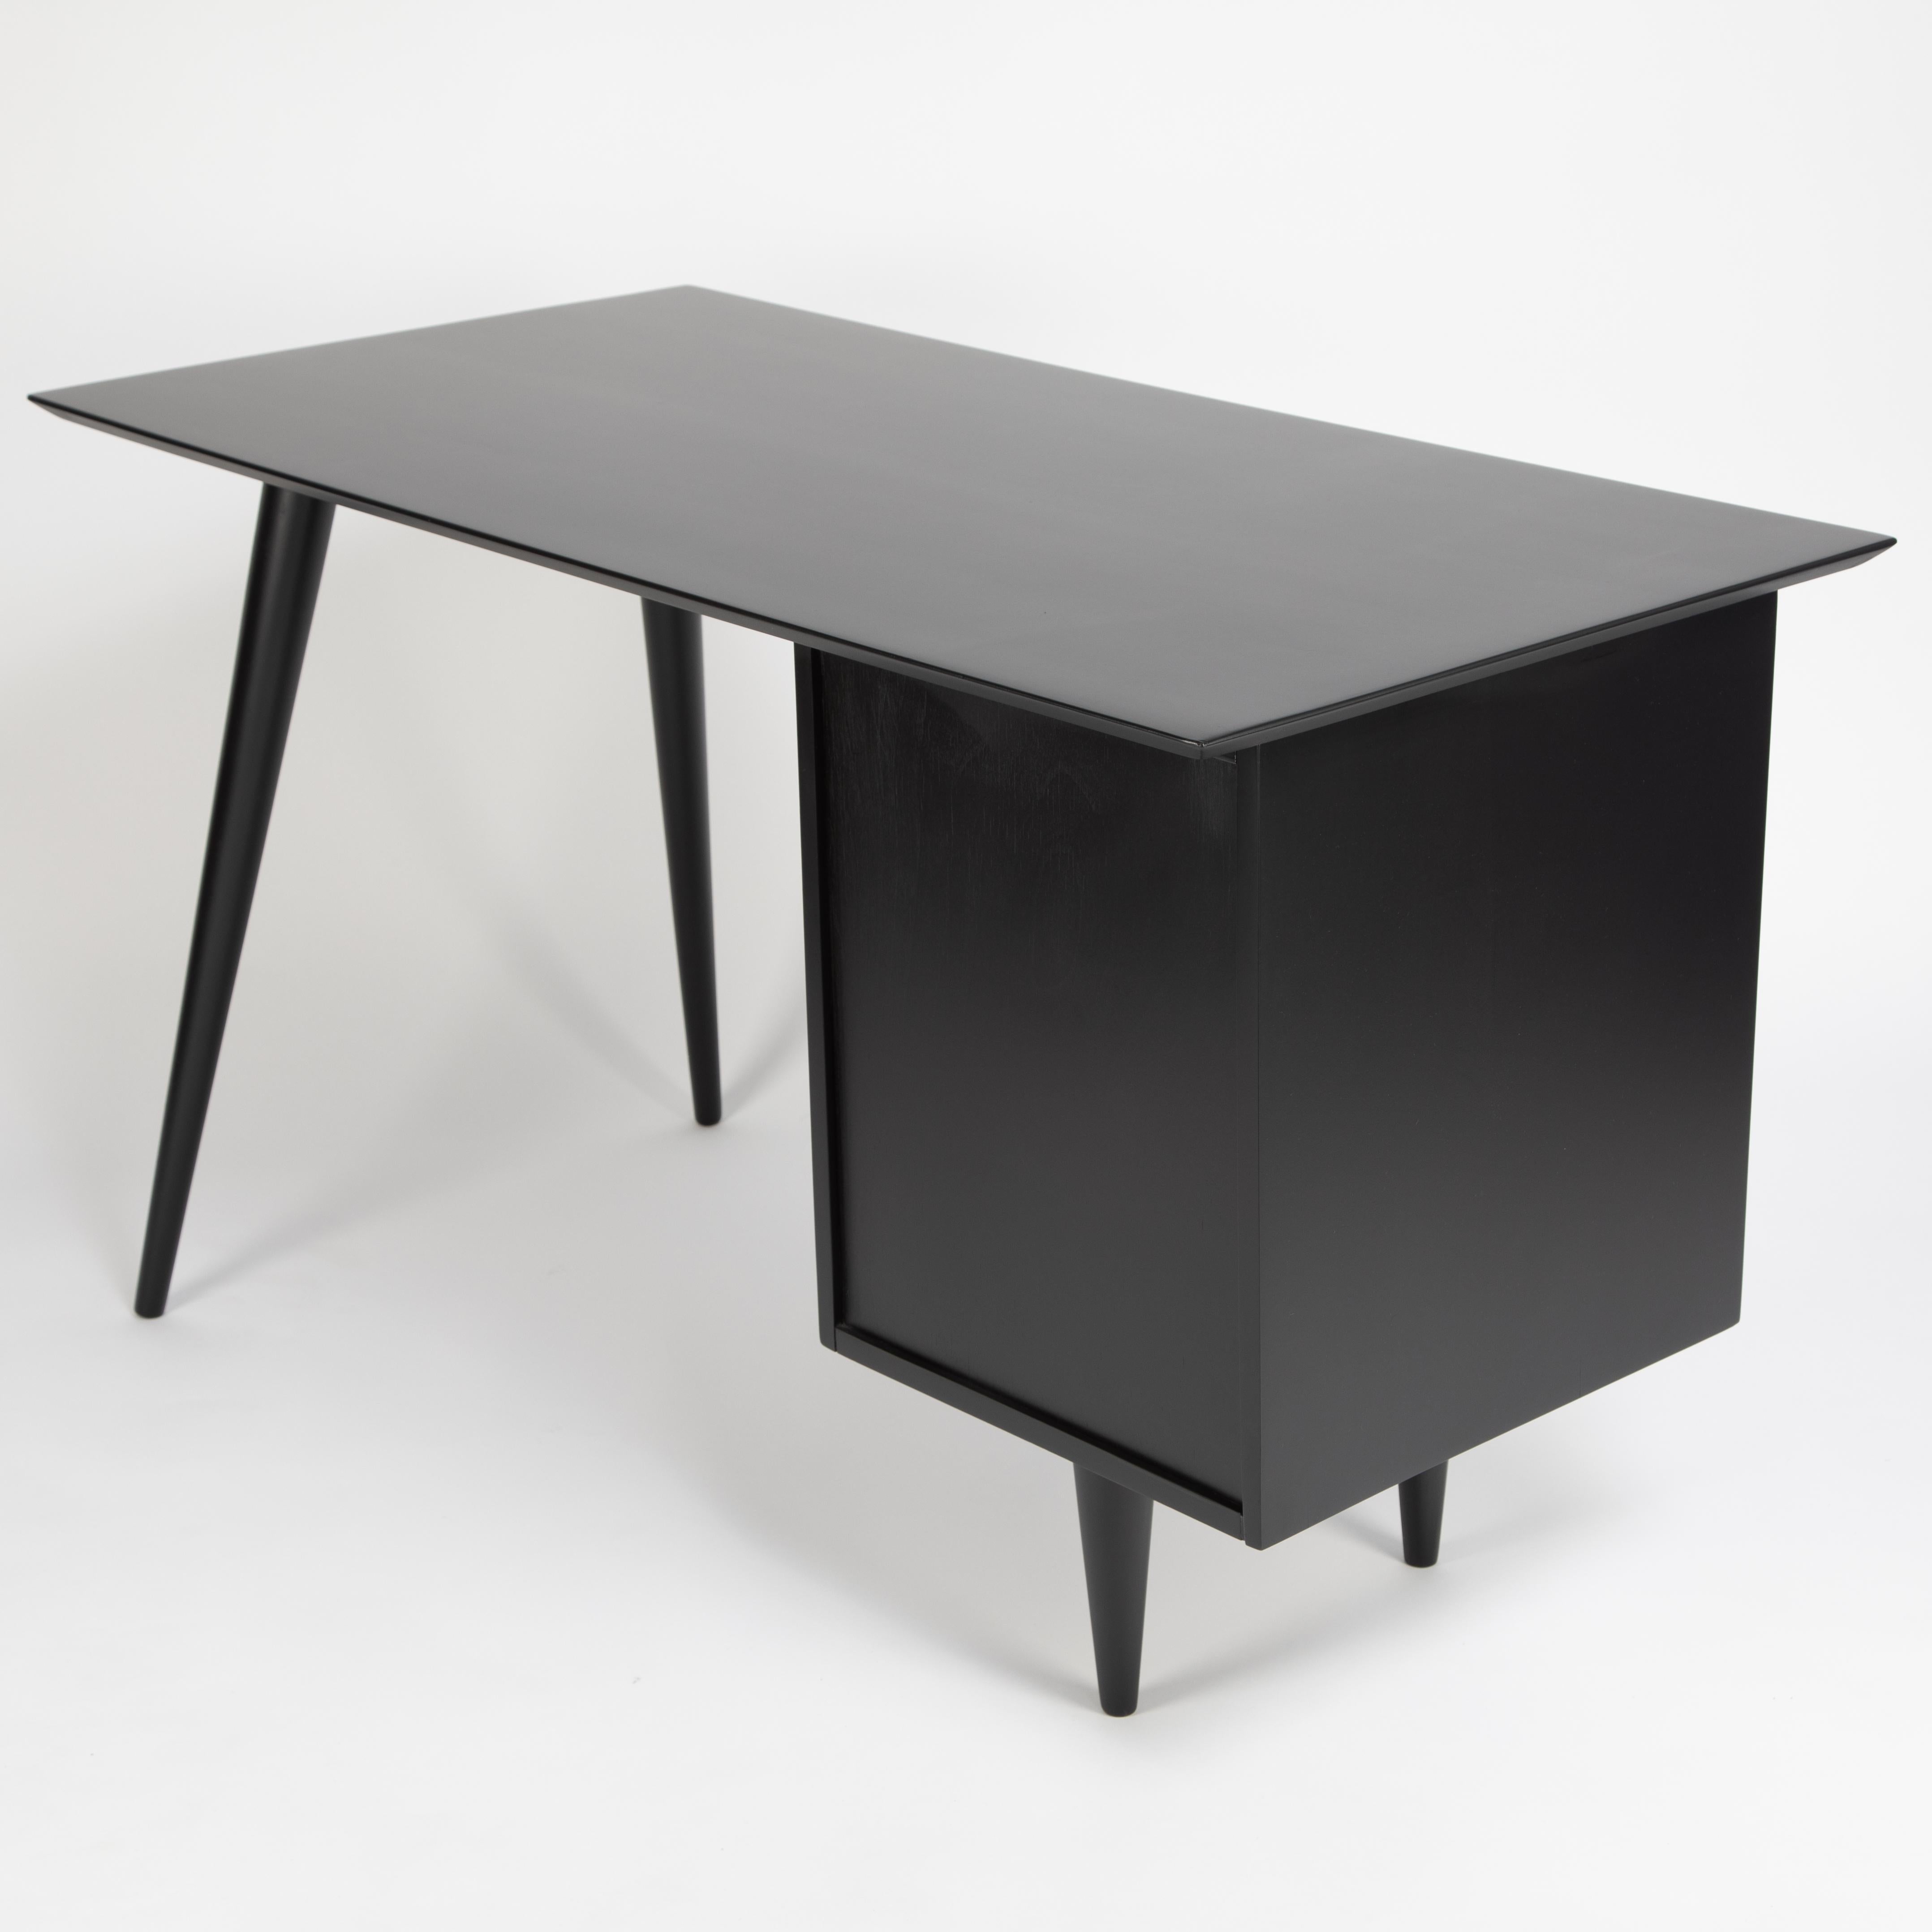 Mid-20th Century Paul McCobb Desk with Tapered Legs, circa 1950s For Sale